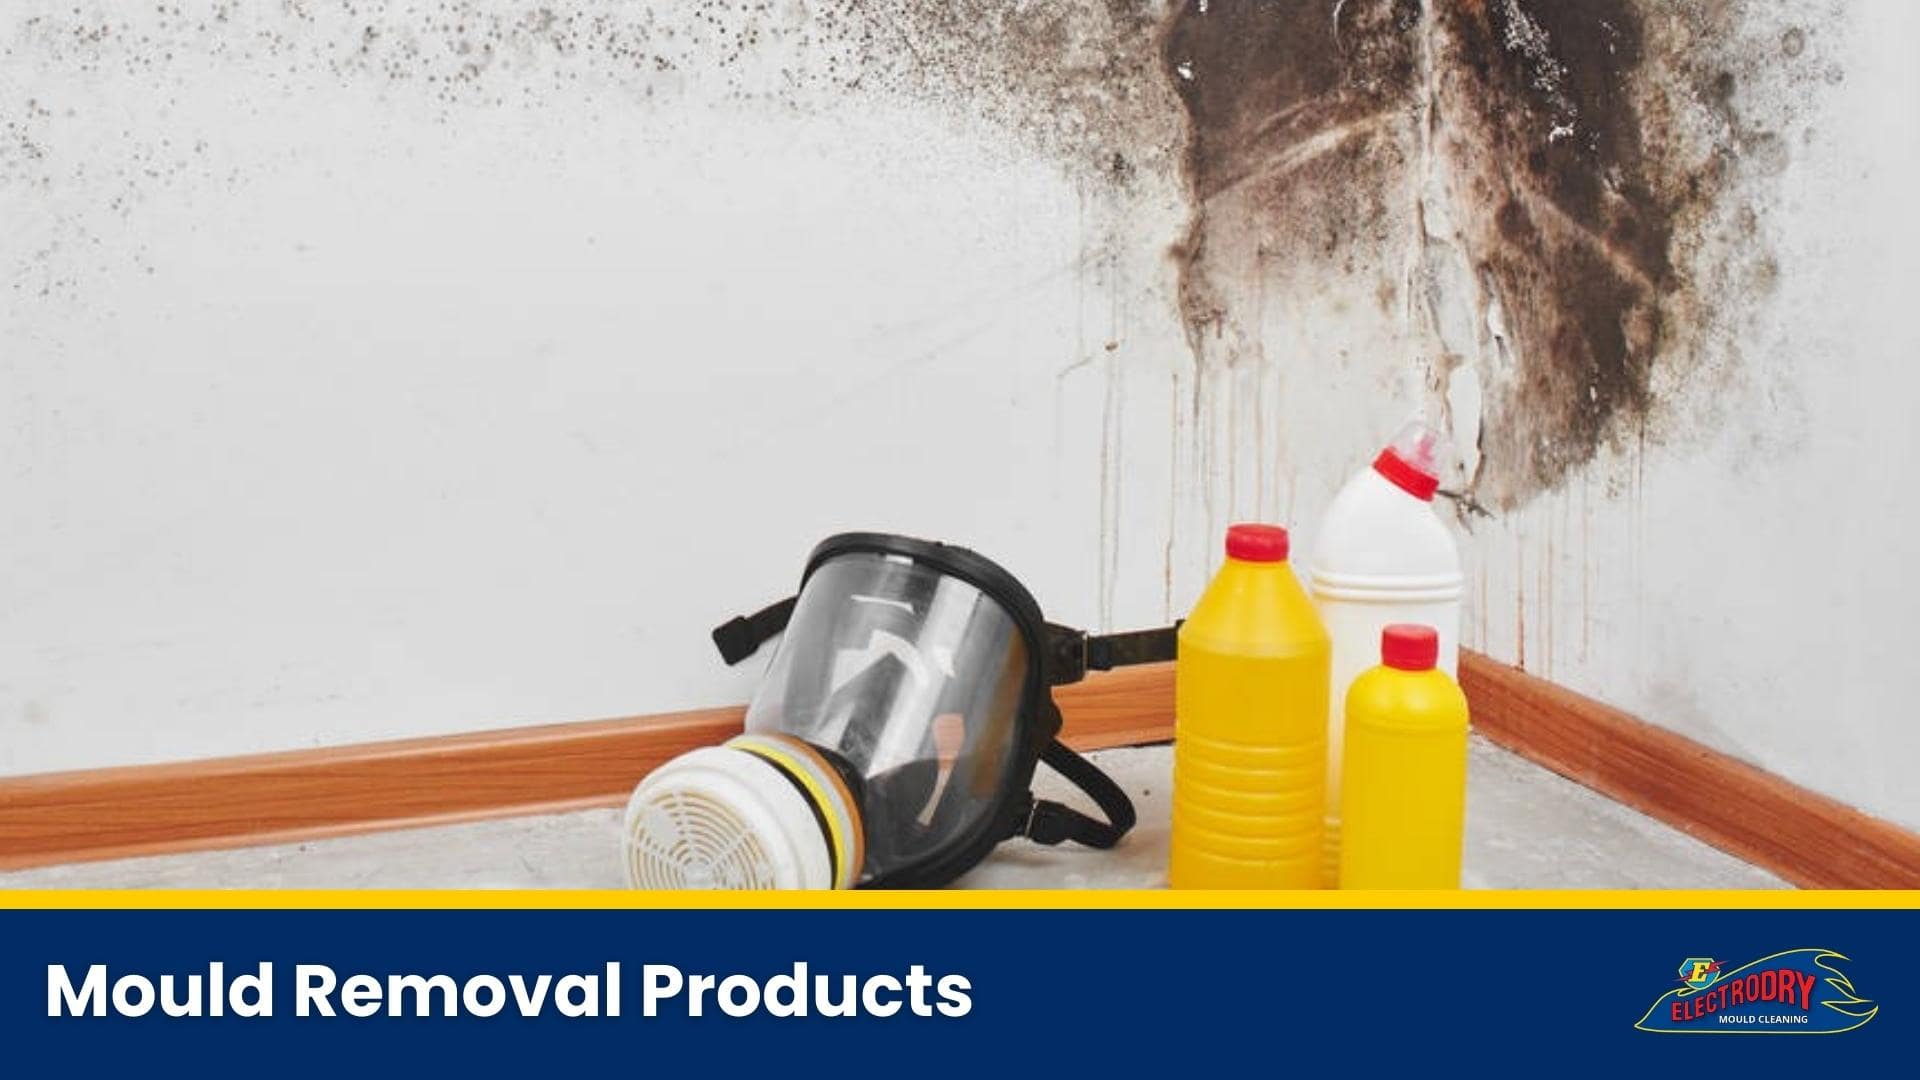 Mould Removal Products